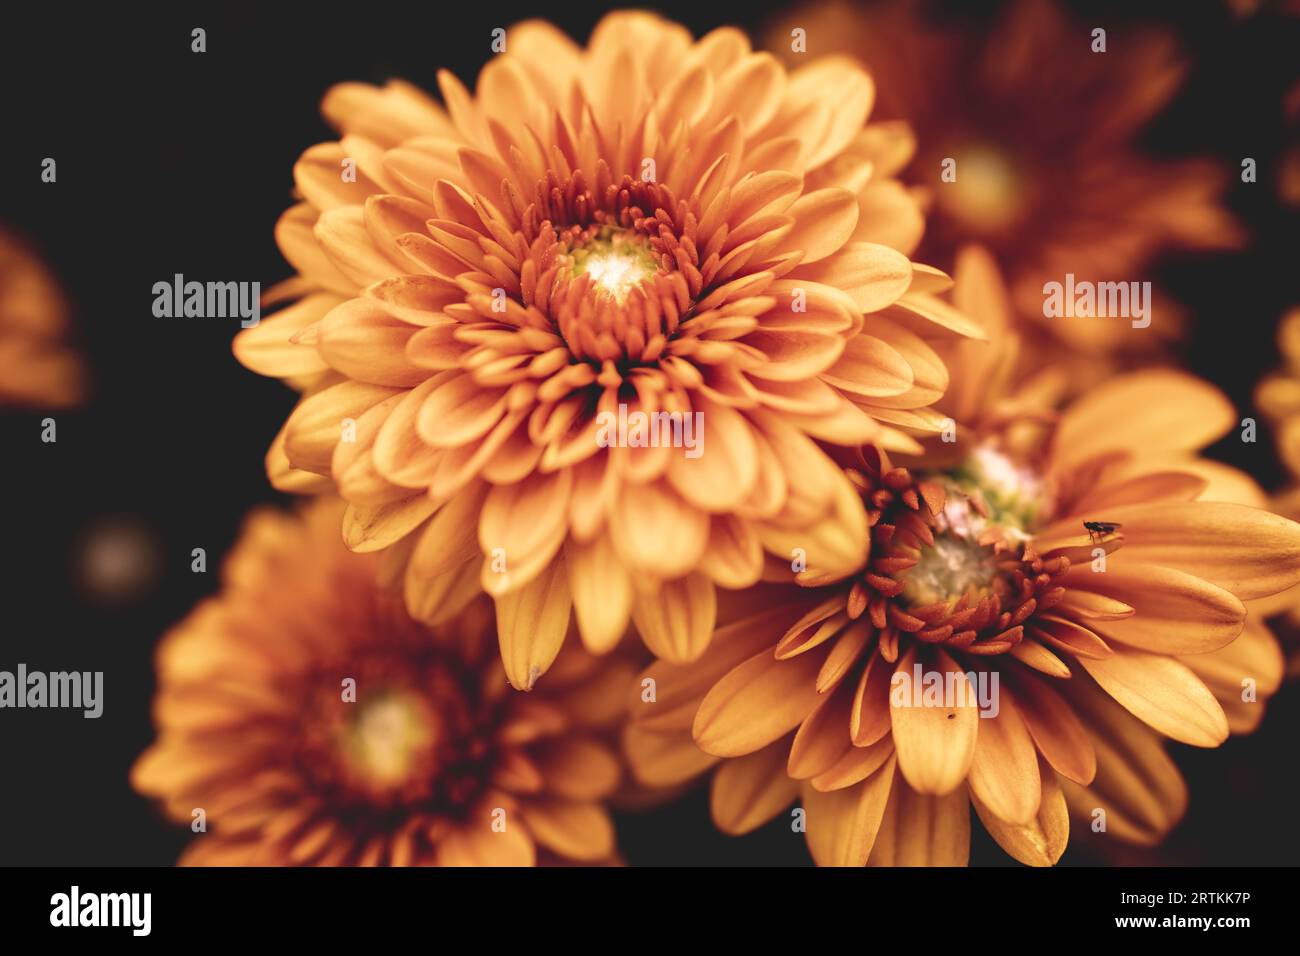 A collection of orange mums from our garden against a black background. Lots of autumn sensations and colors Stock Photo